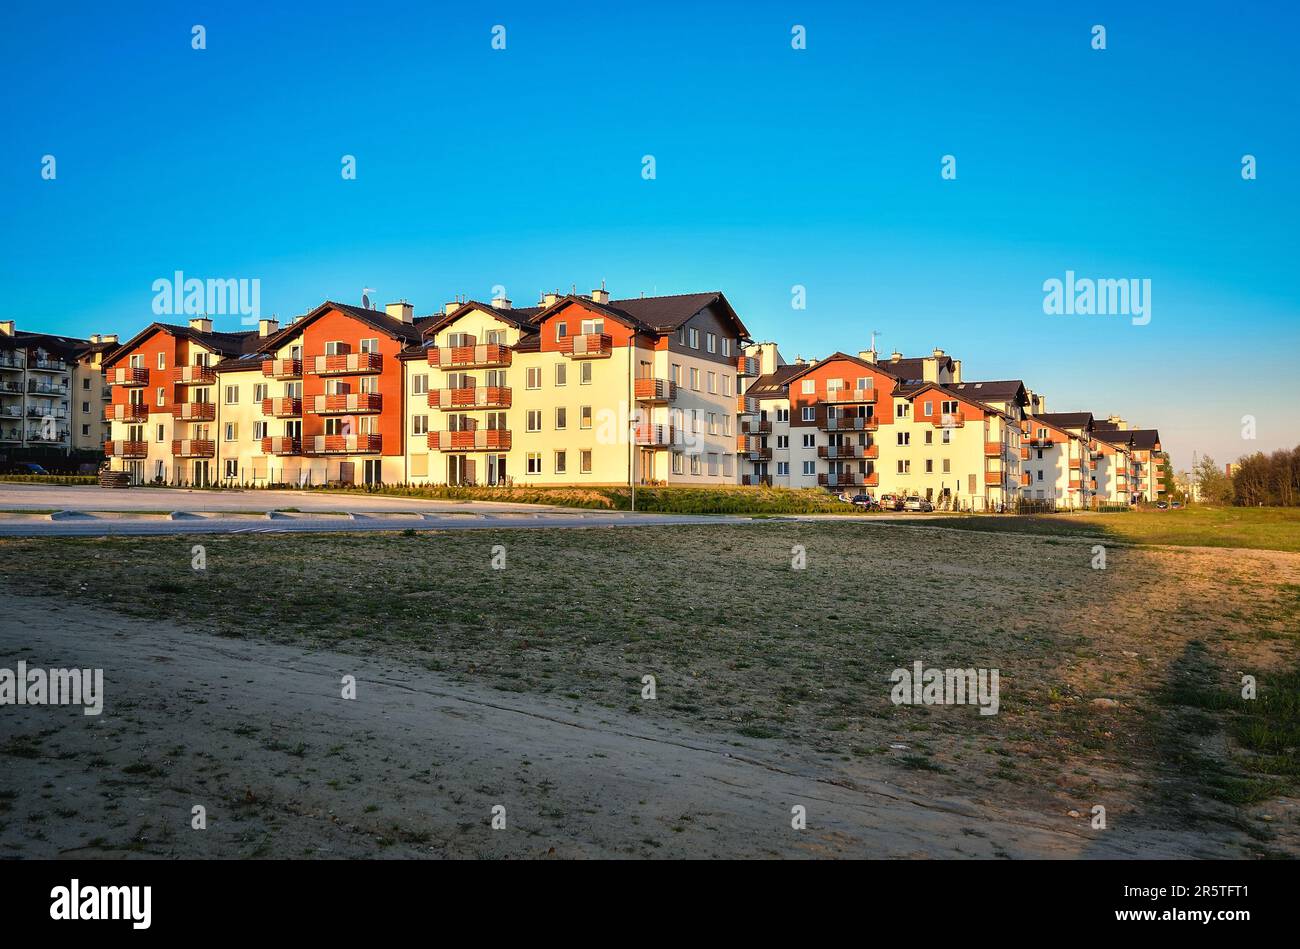 Tychy, Poland - April 29, 2016: New housing estates in Tychy City, Poland. Public view of newly built block of flats in the green area. Stock Photo